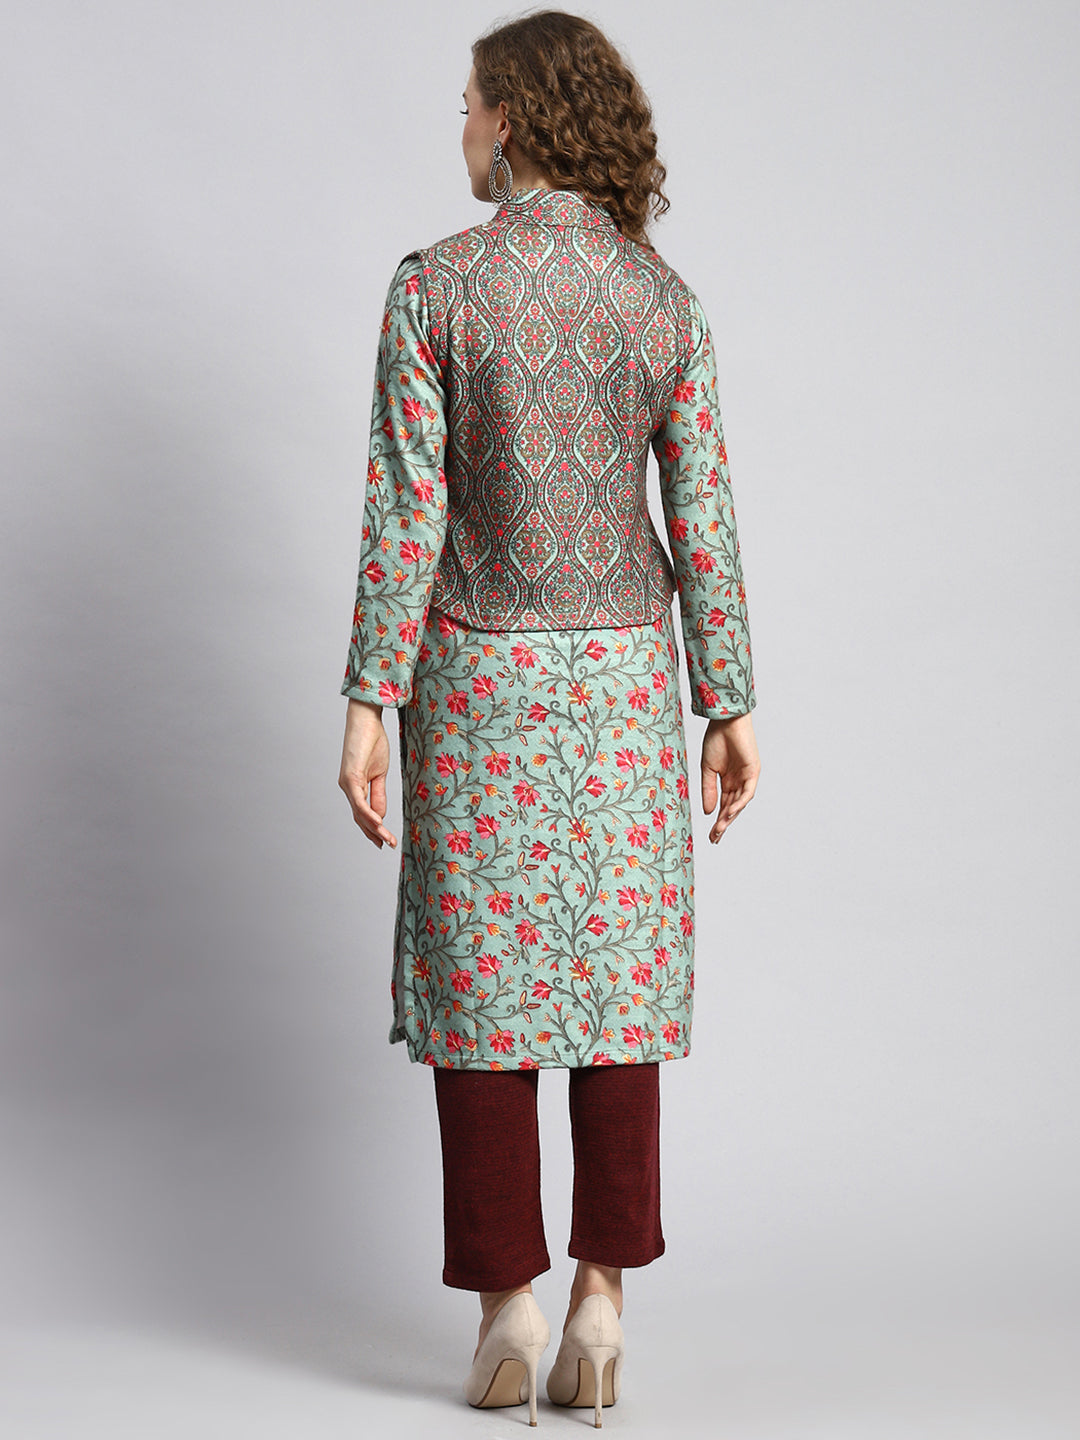 Discover more than 150 jeans kurti with jacket